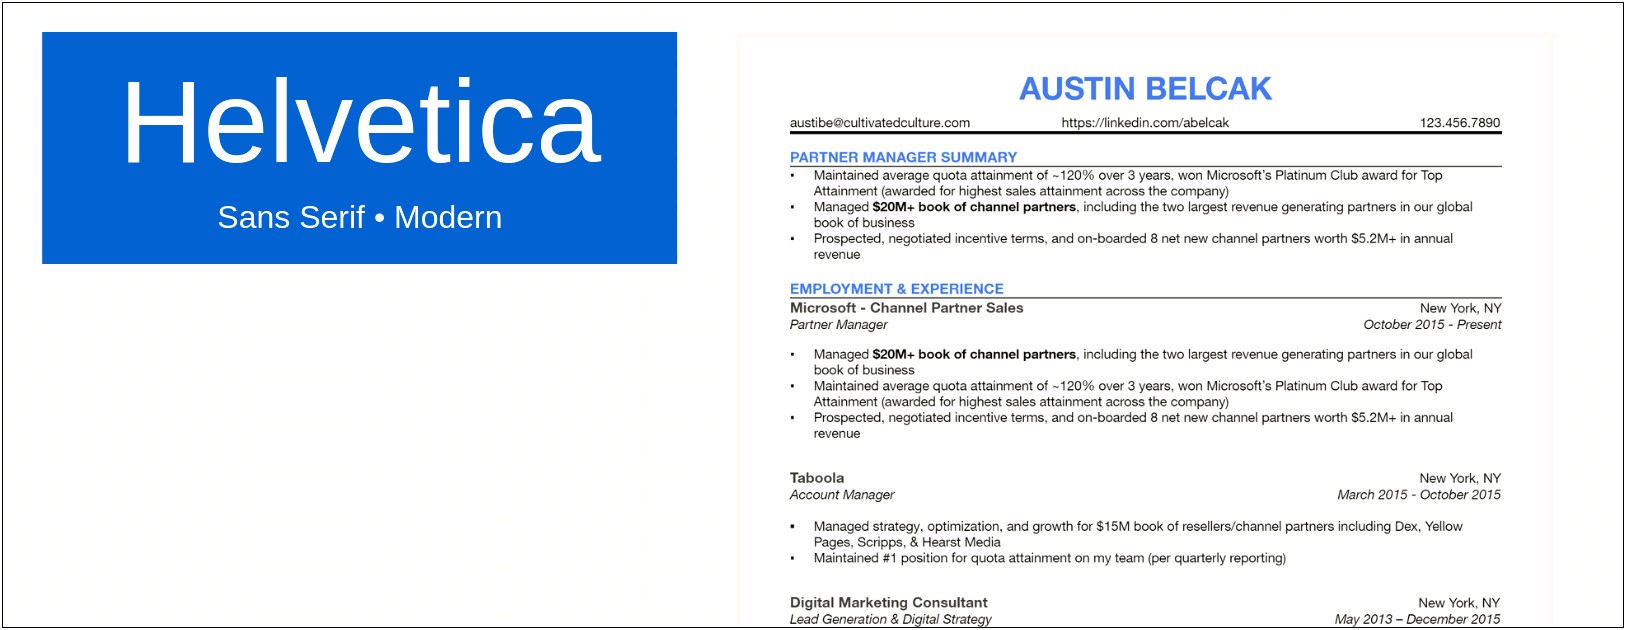 Best Acceptable Font Size For Resume